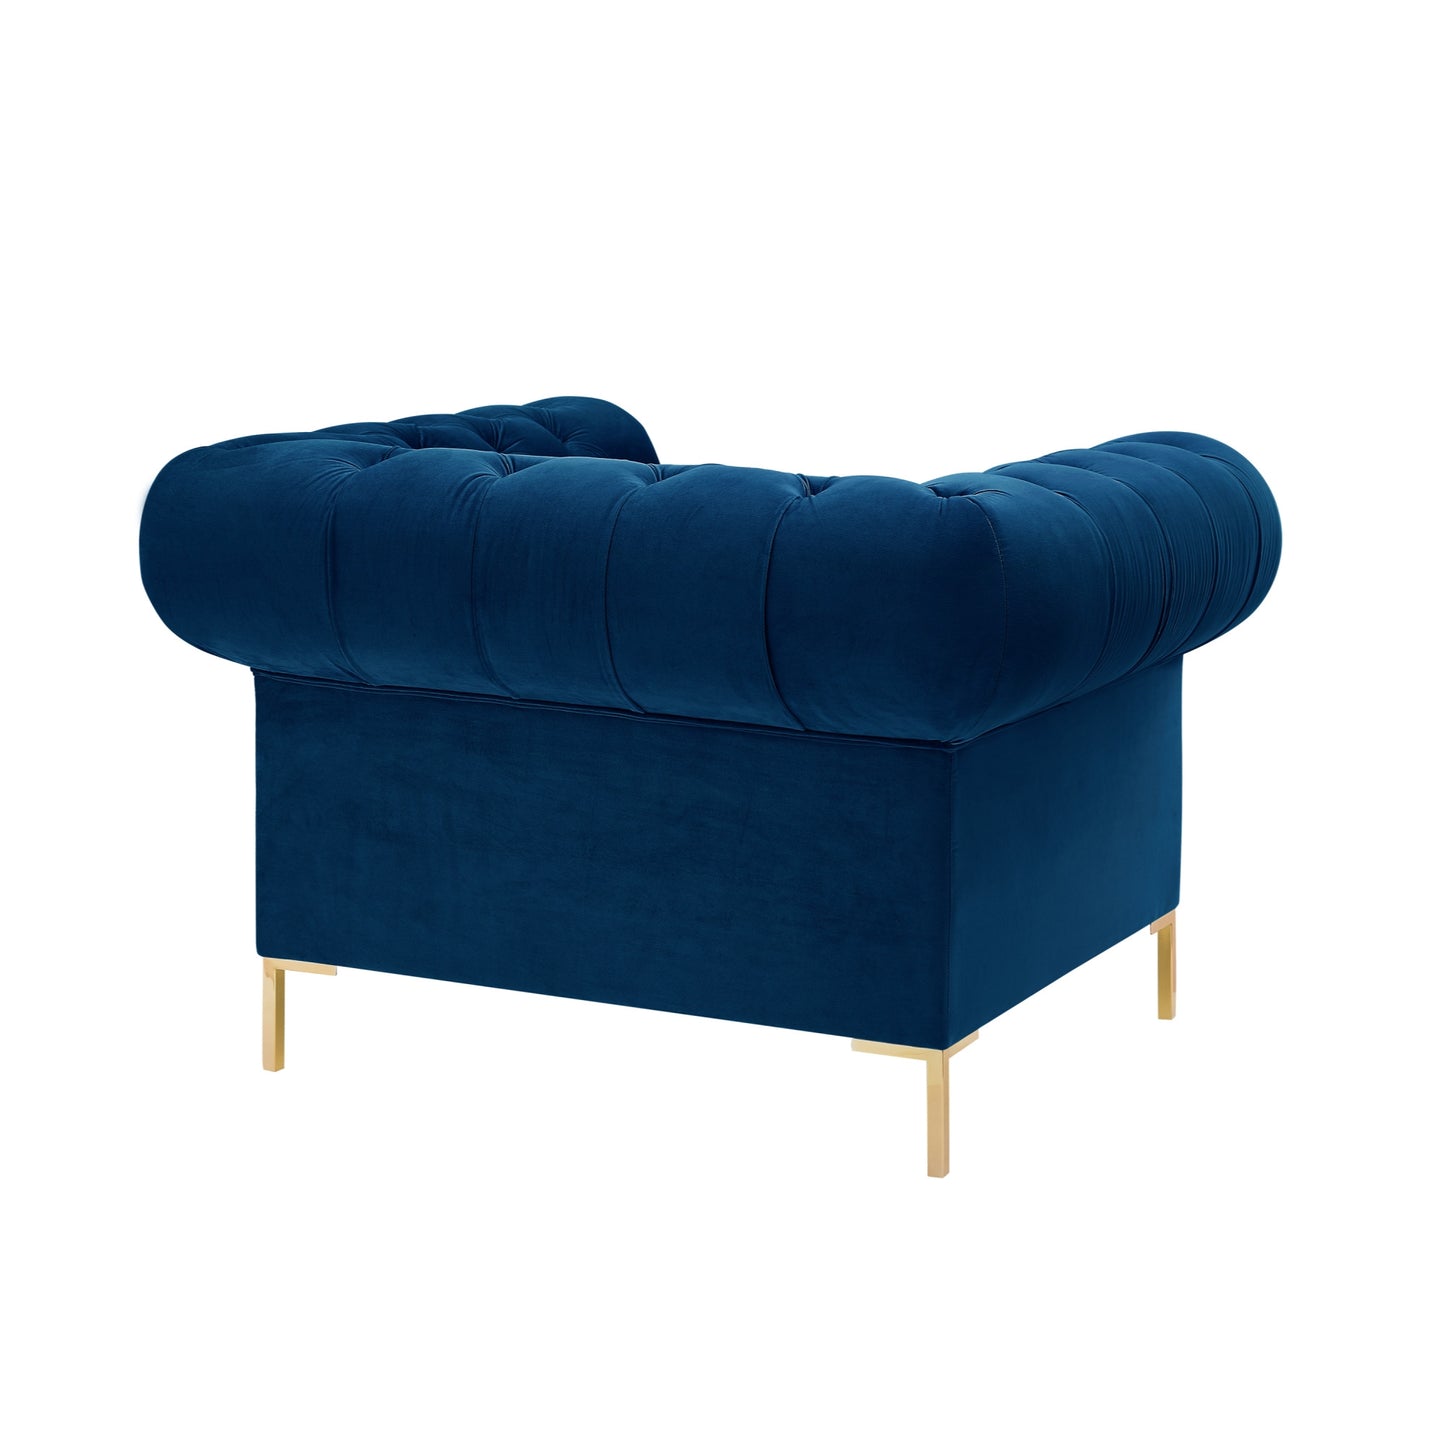 39" Navy Blue And Gold Velvet Tufted Chesterfield Chair